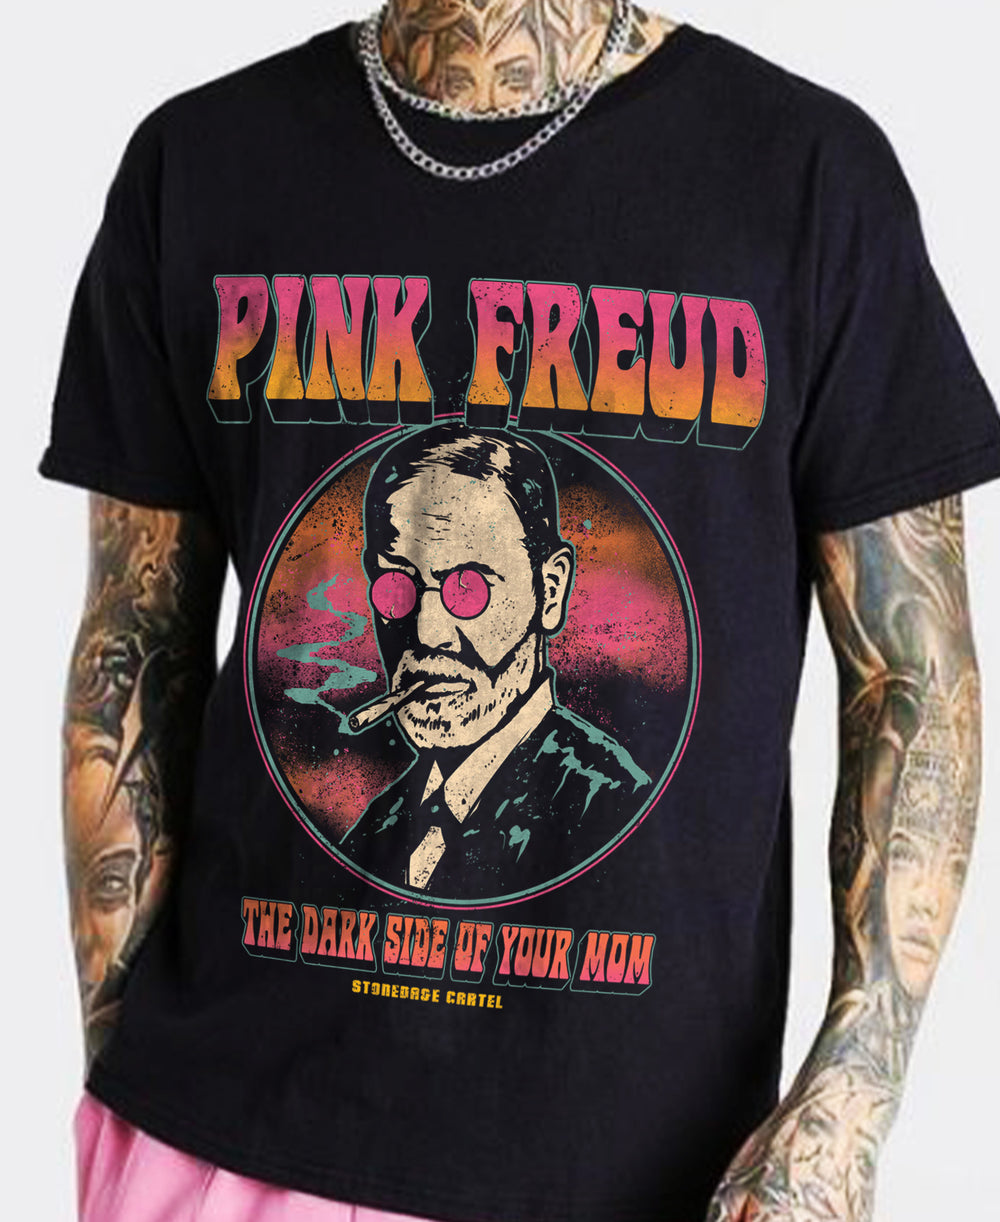 Pink Freud - The Dark Side Of Your Mom Unisex Tee Model Man